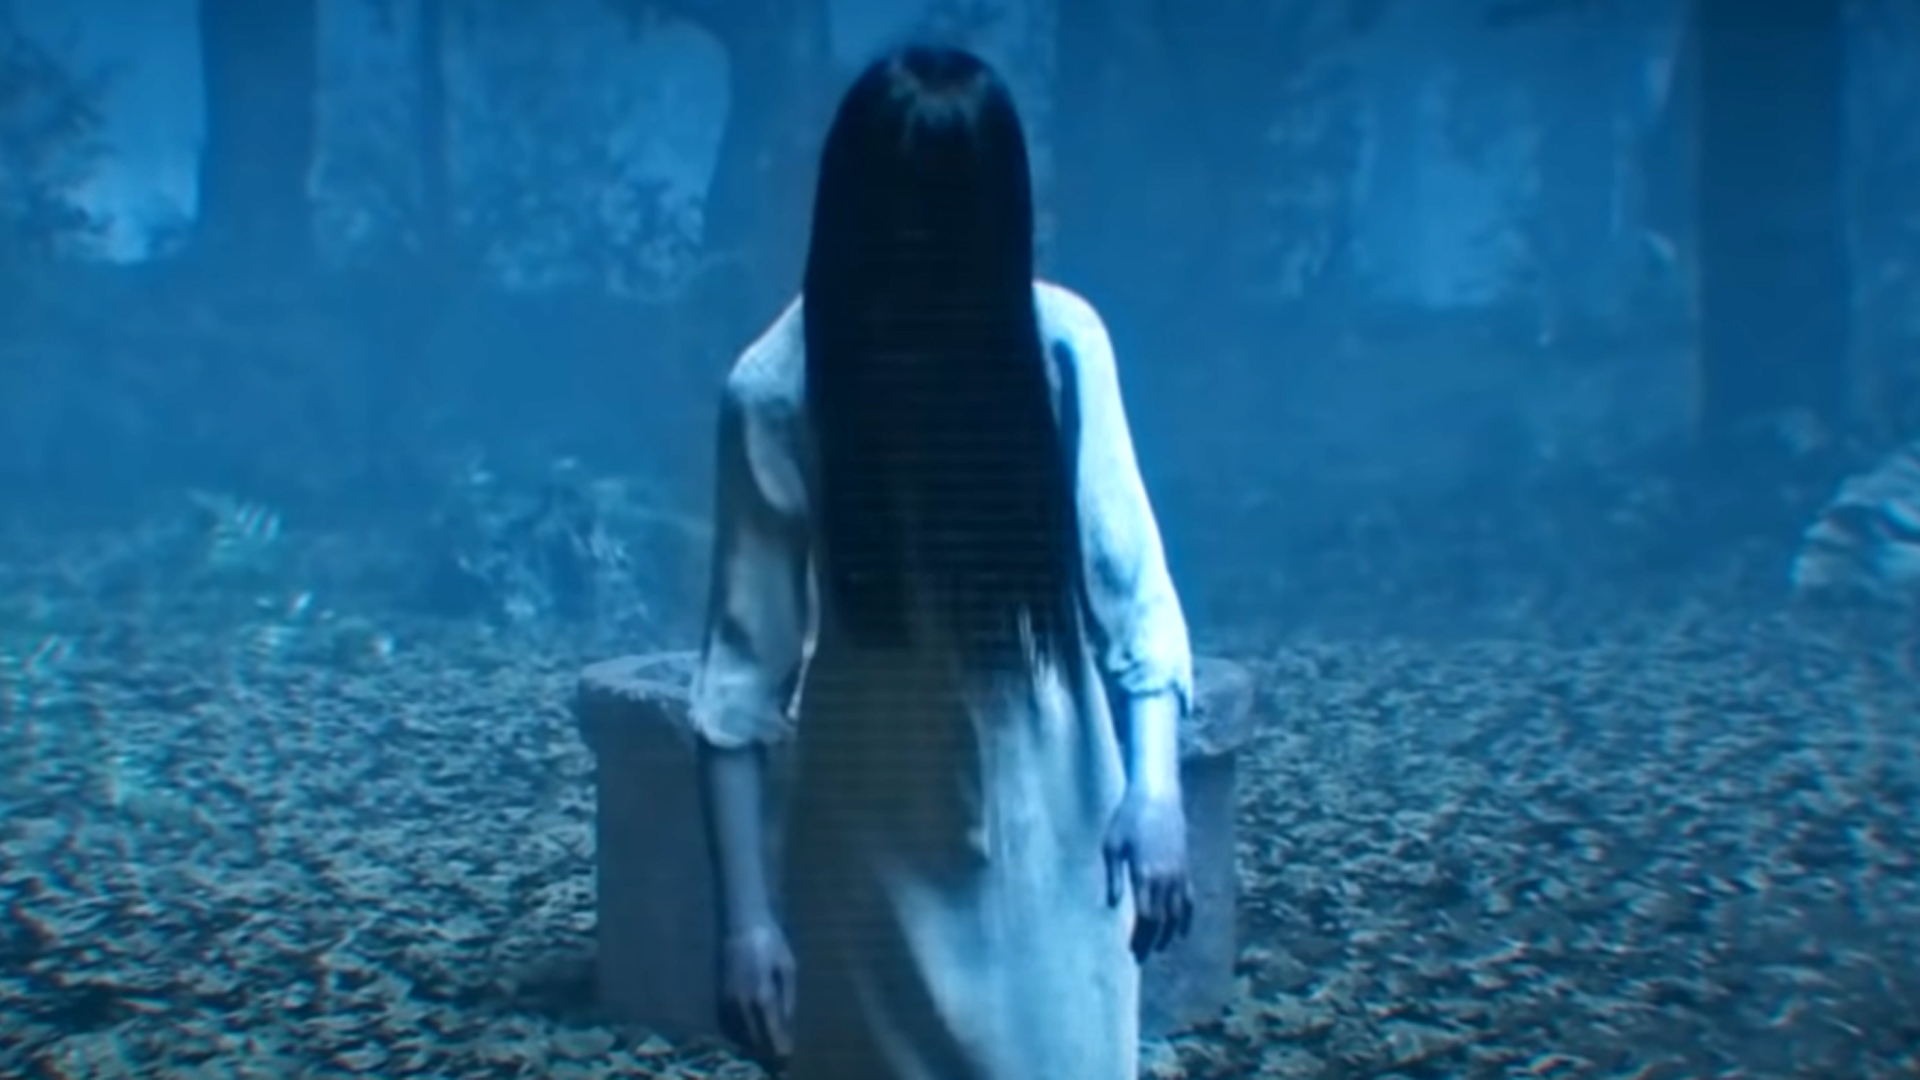 Dead By Daylight's Sadako is proving too scary for some players